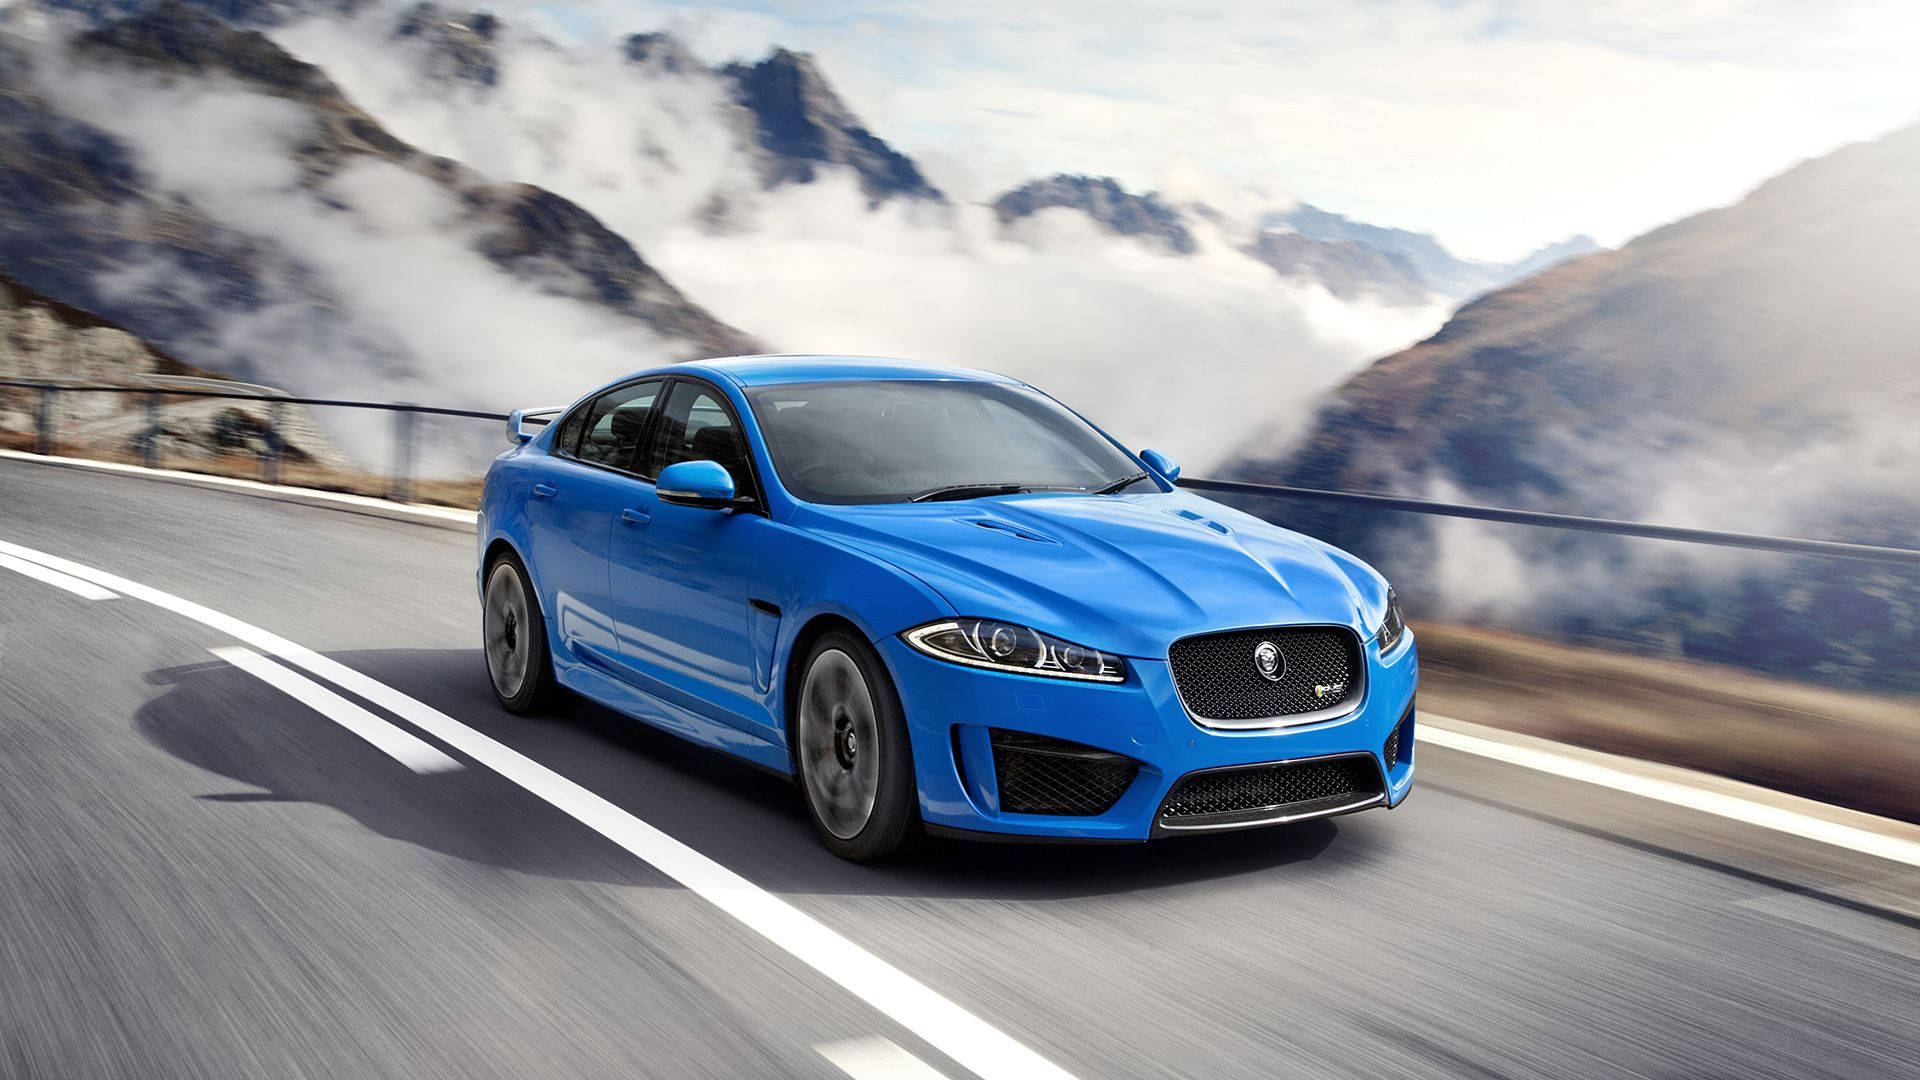 Experience The Majesty Of The Wild In A Blue Jaguar Background